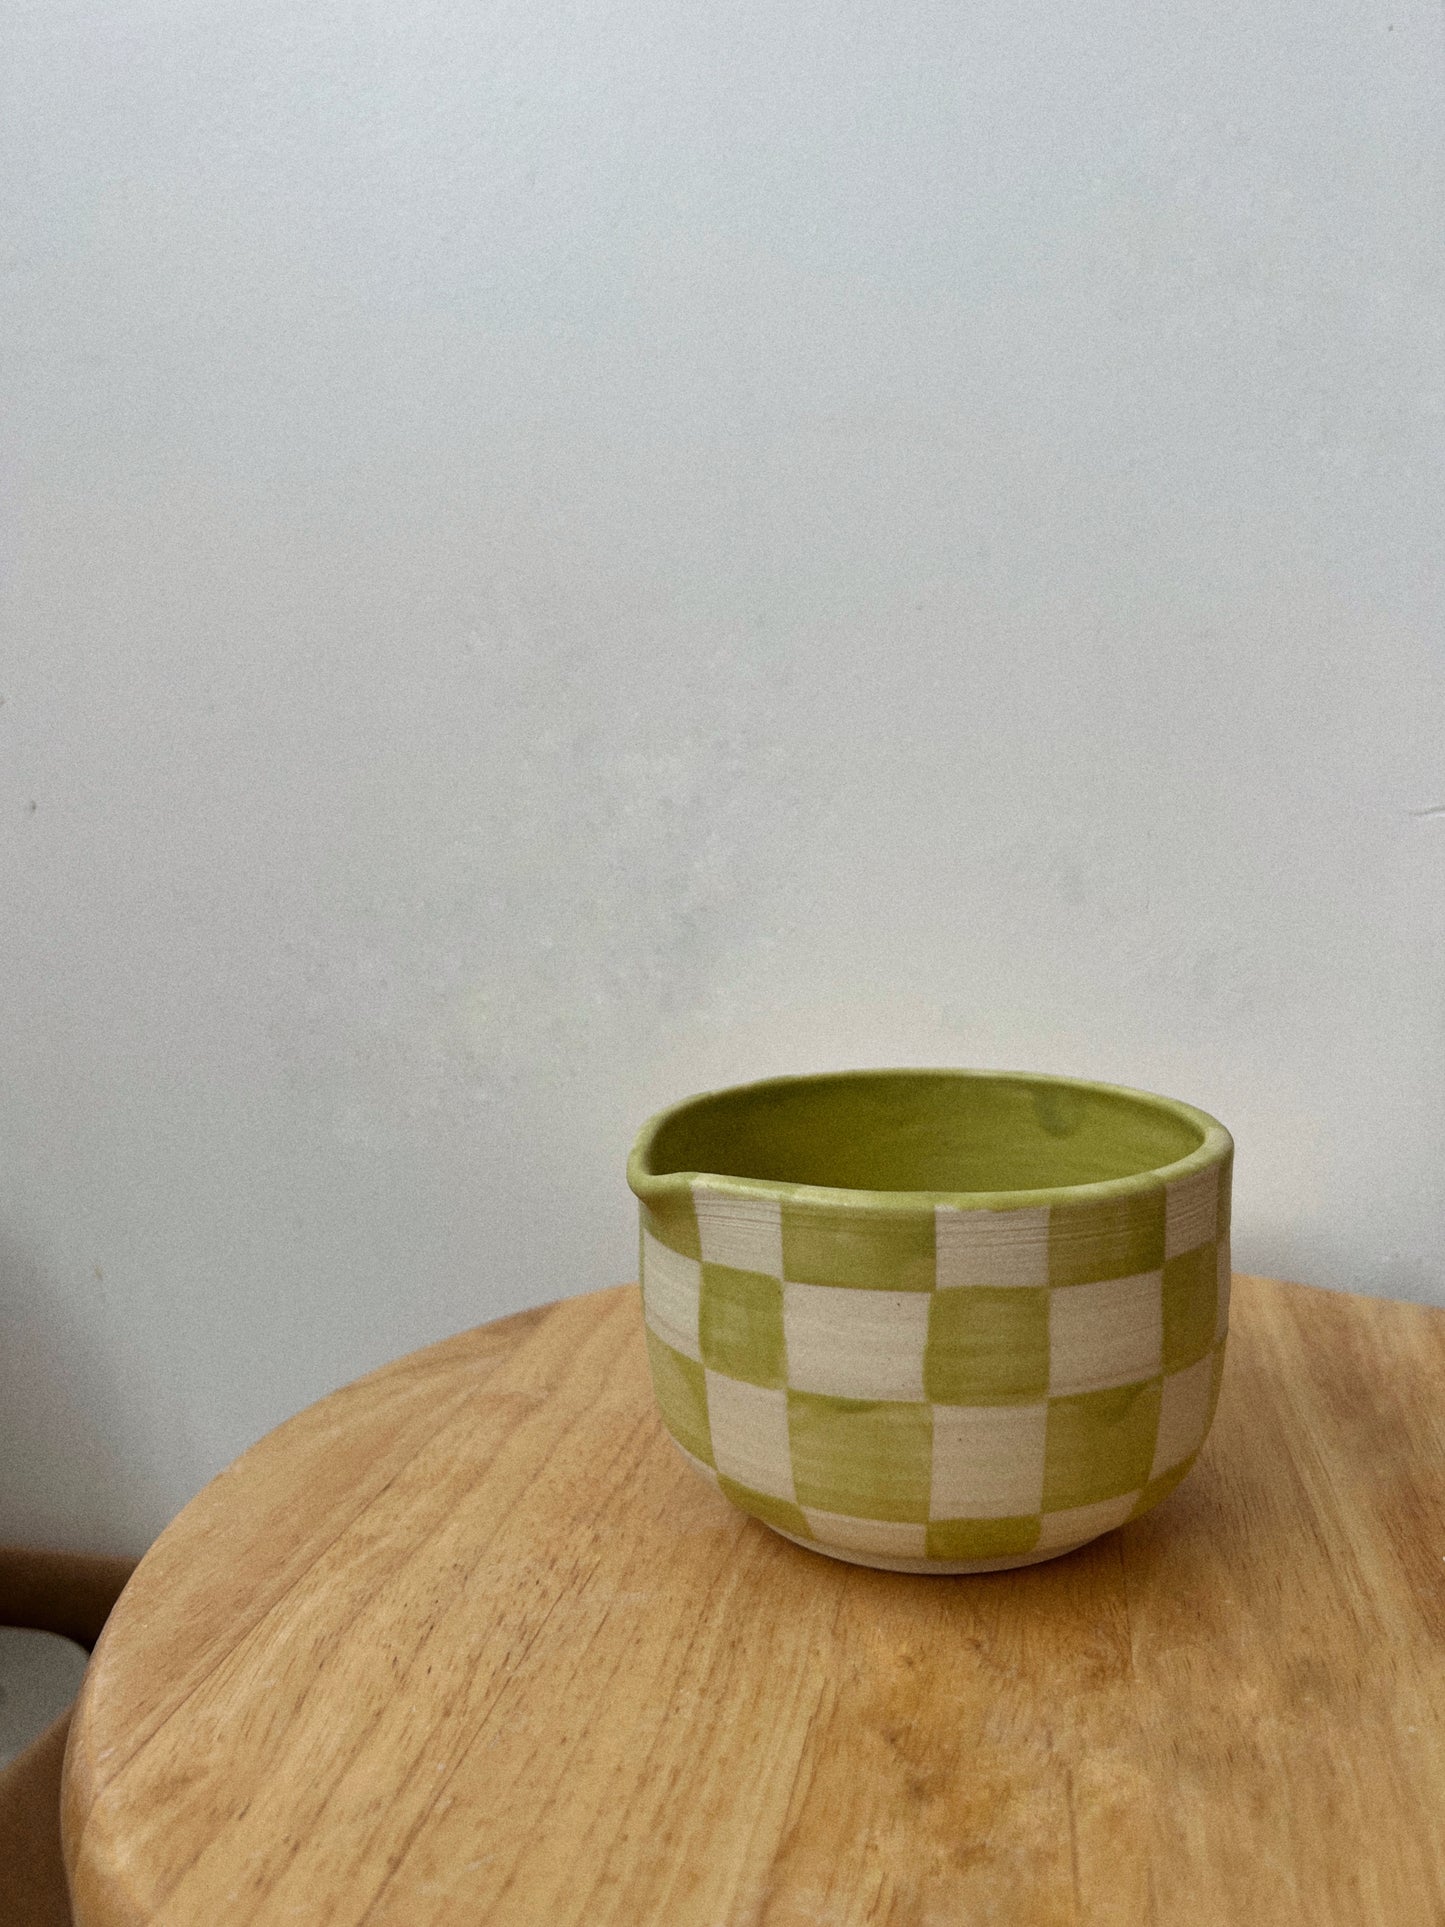 Checkered Matcha Bowl - Collab with @CourtandNate